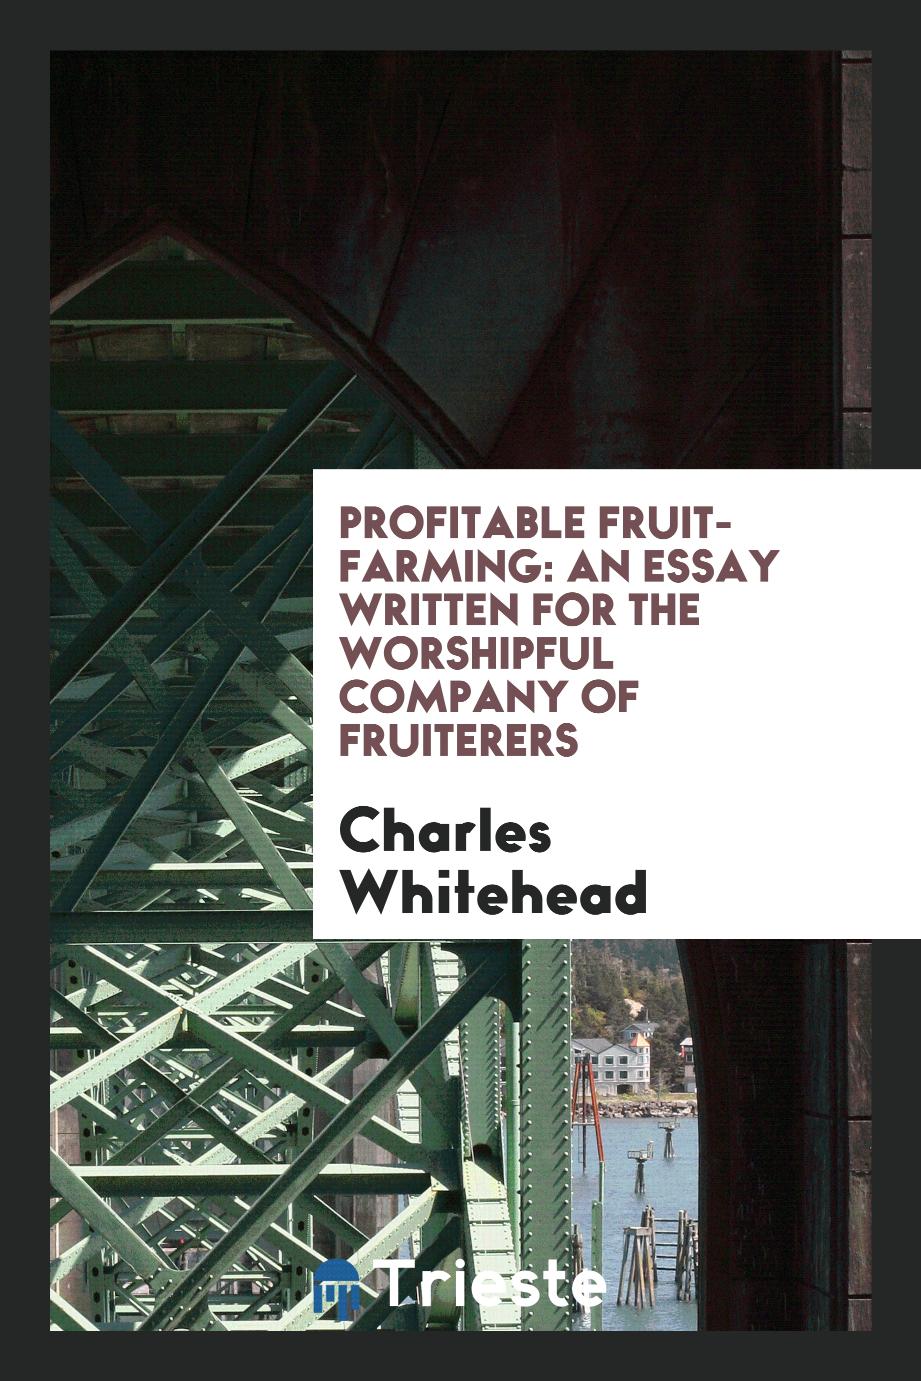 Profitable Fruit-Farming: An Essay Written for The Worshipful Company of Fruiterers